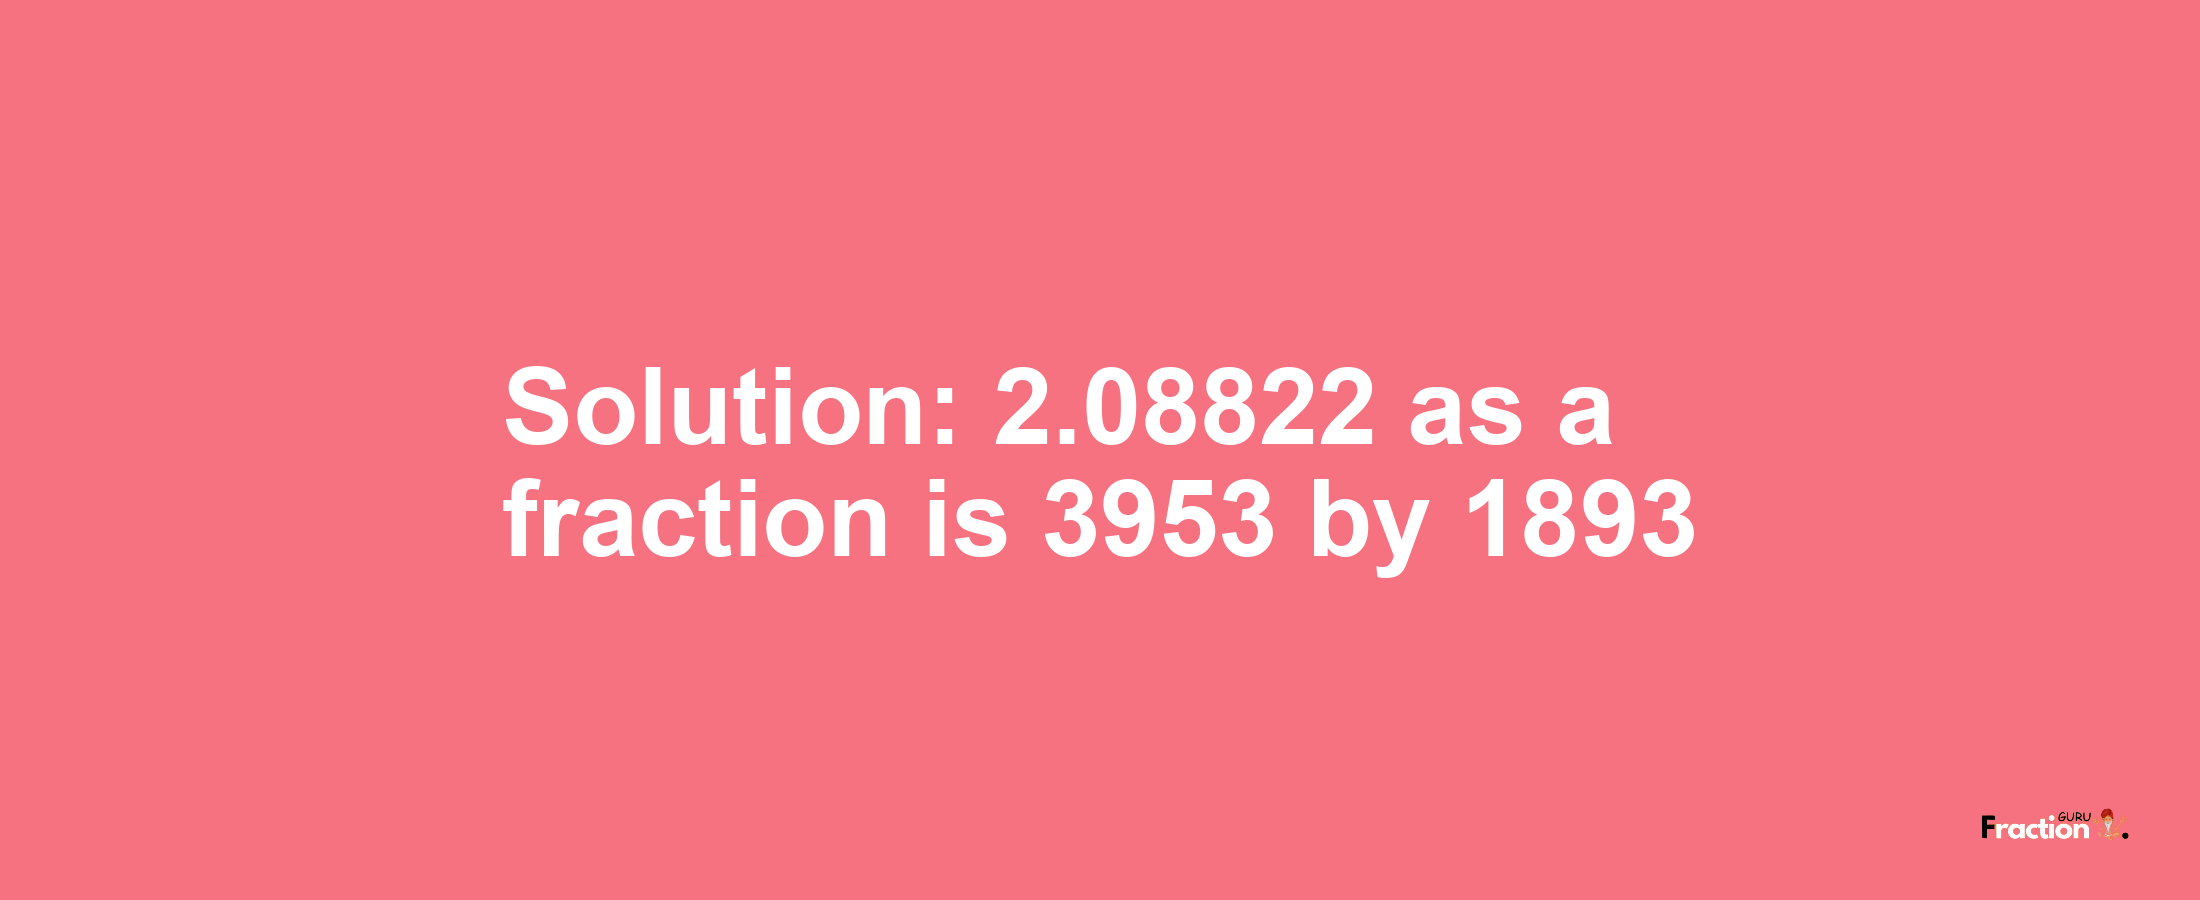 Solution:2.08822 as a fraction is 3953/1893